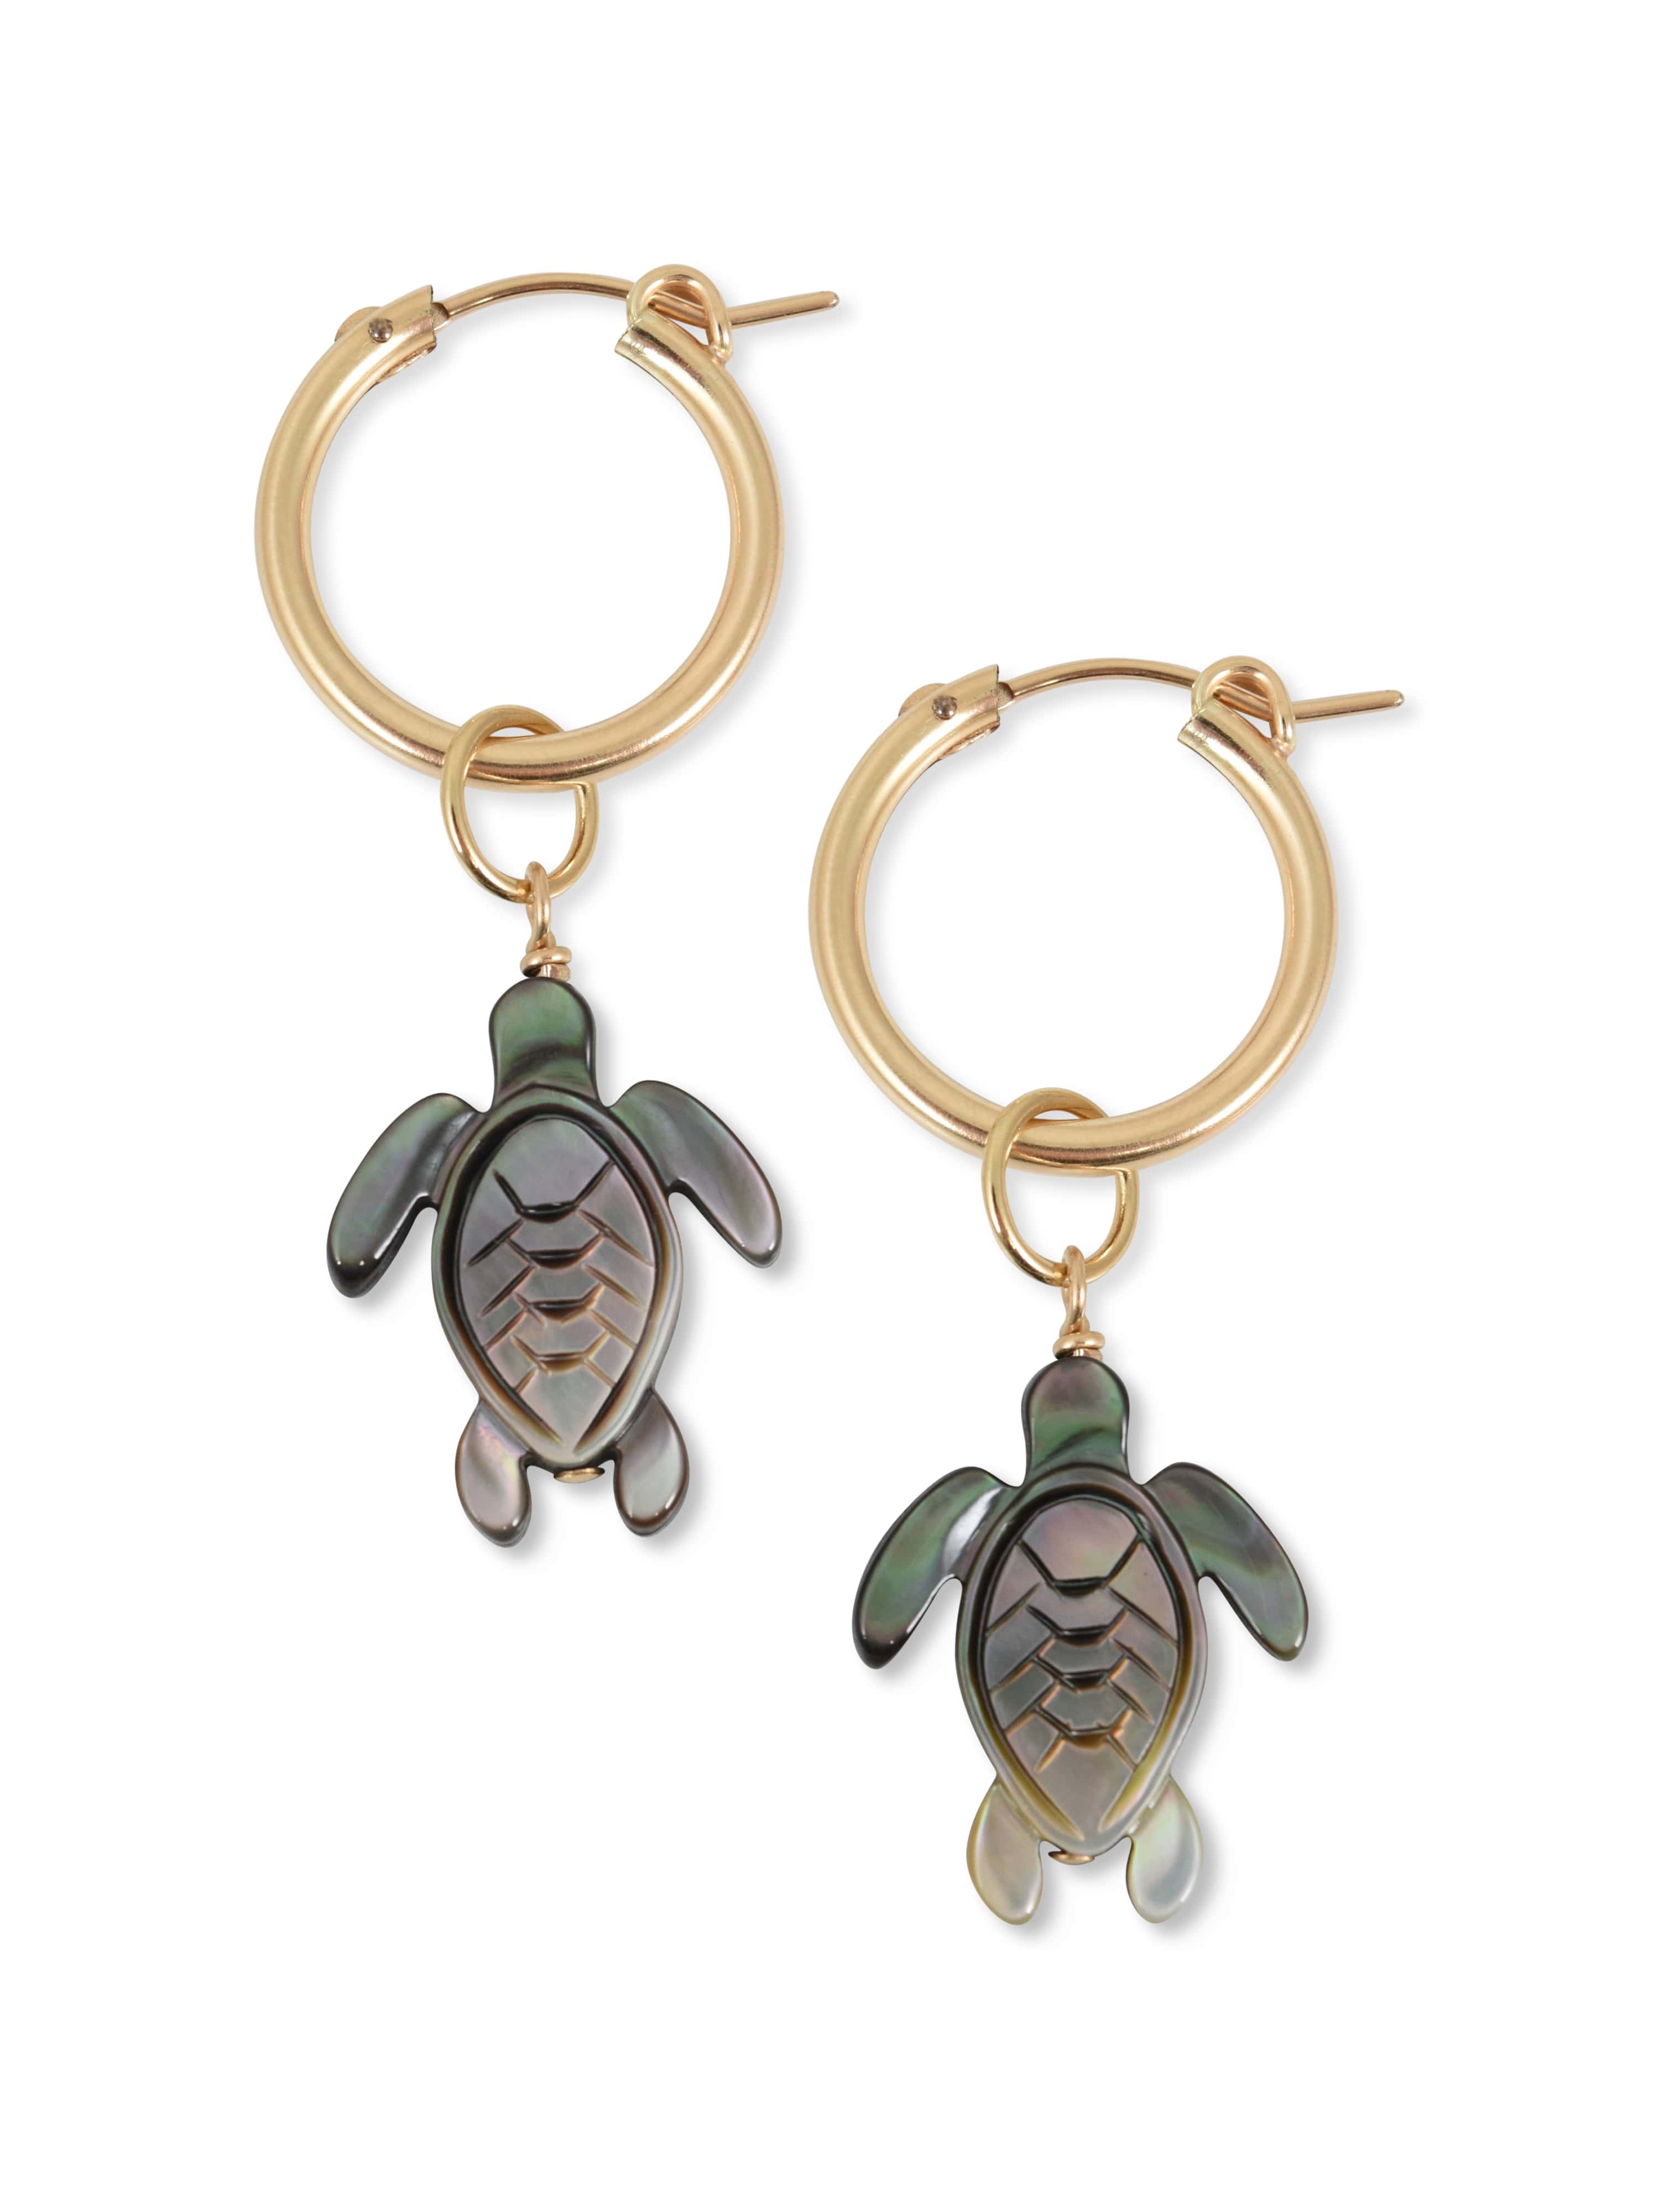 Turtle Charm in Black Mother of Pearl